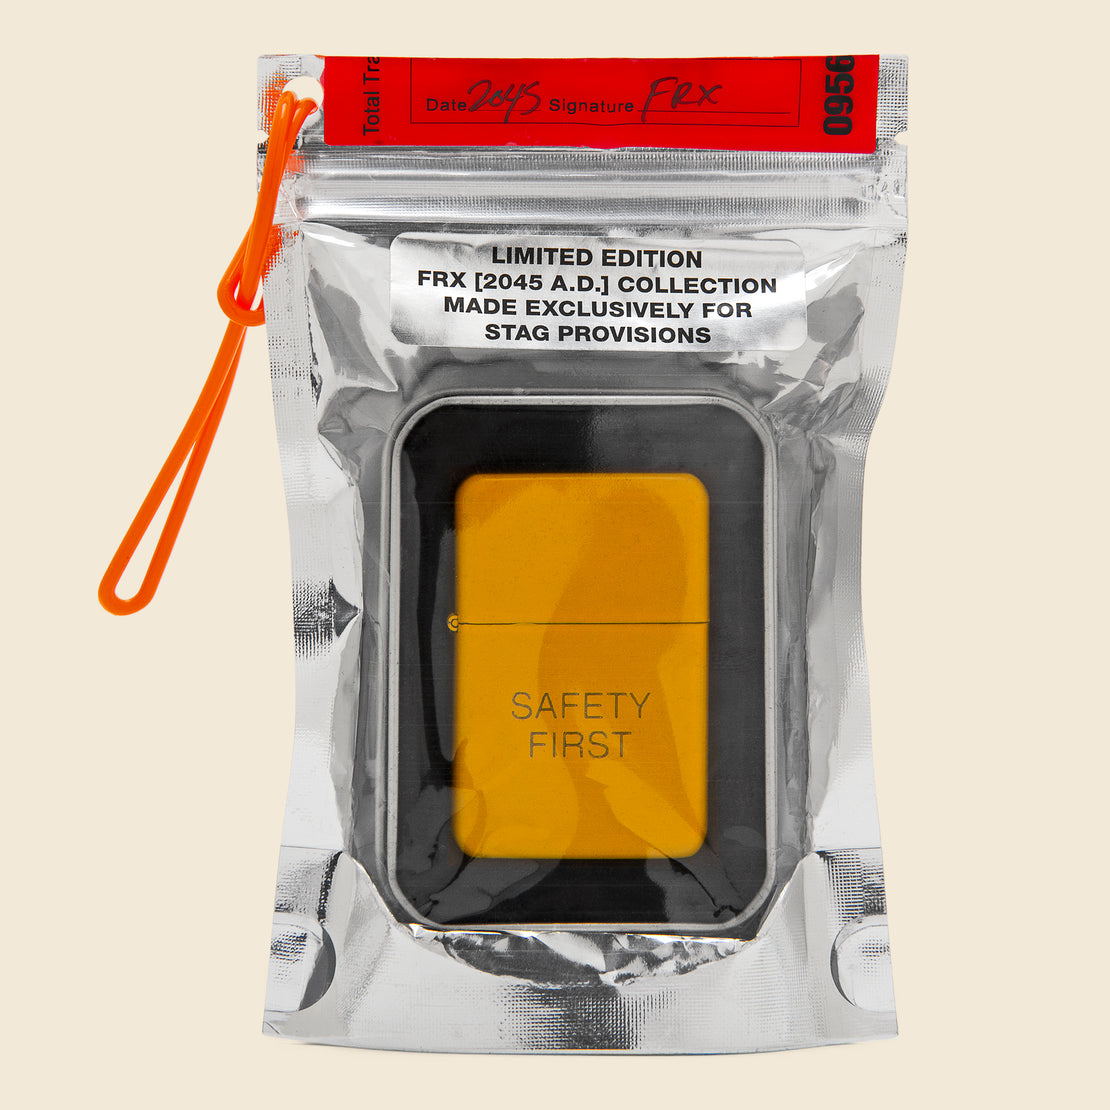 Field Rations Zippo Lighter - SAFETY FIRST